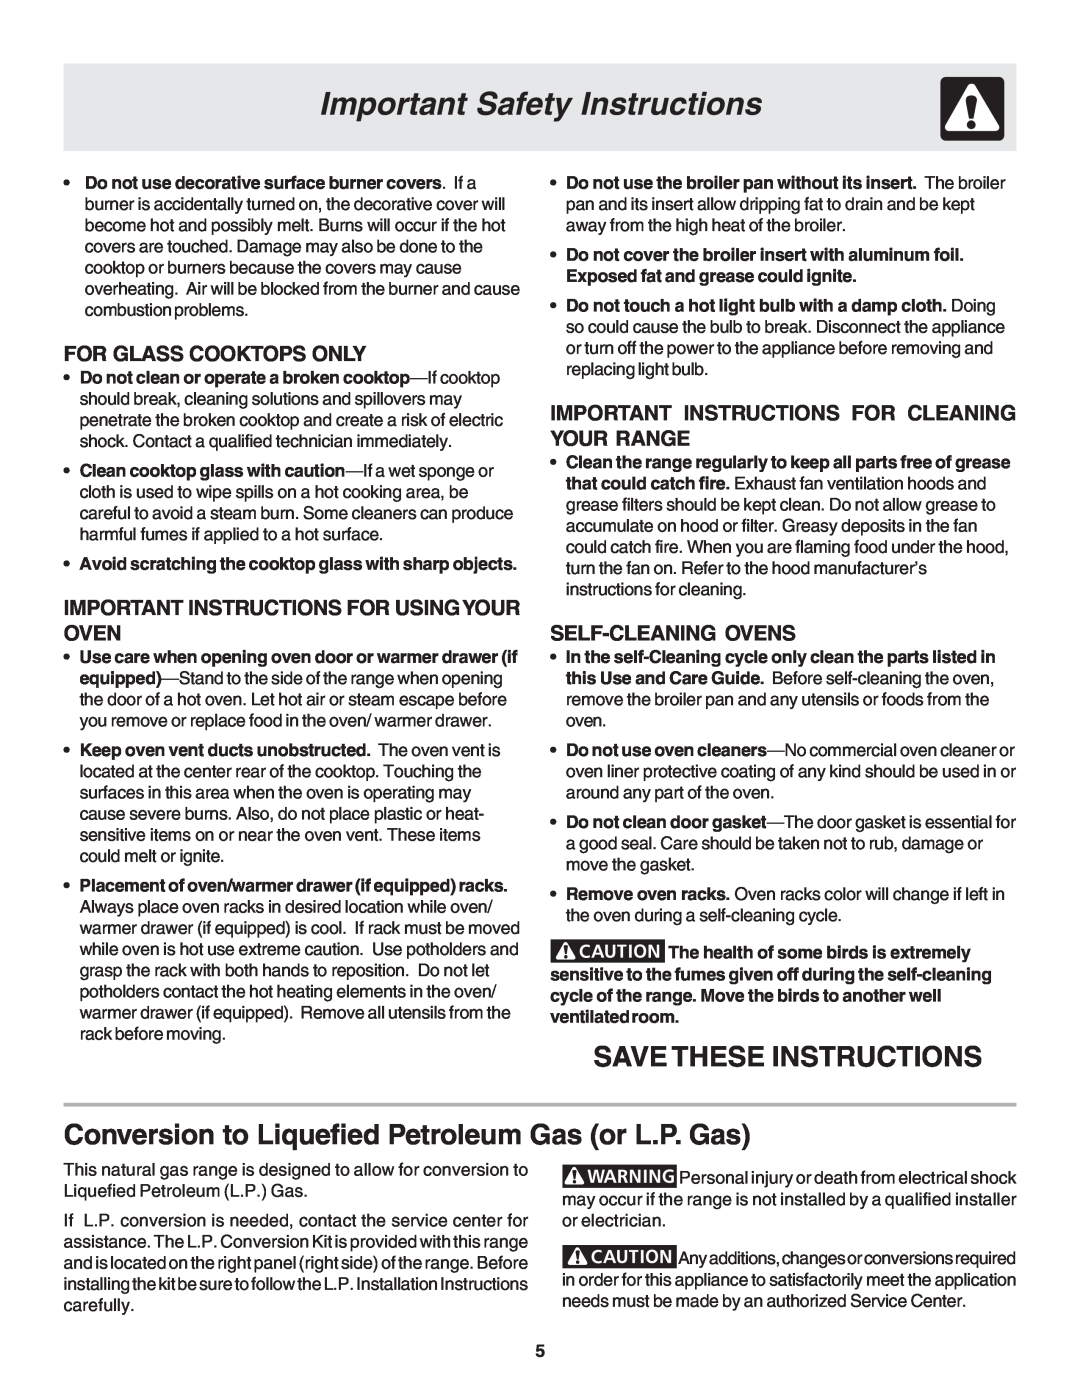 Frigidaire 318203863 Save These Instructions, Conversion to Liquefied Petroleum Gas or L.P. Gas, For Glass Cooktops Only 